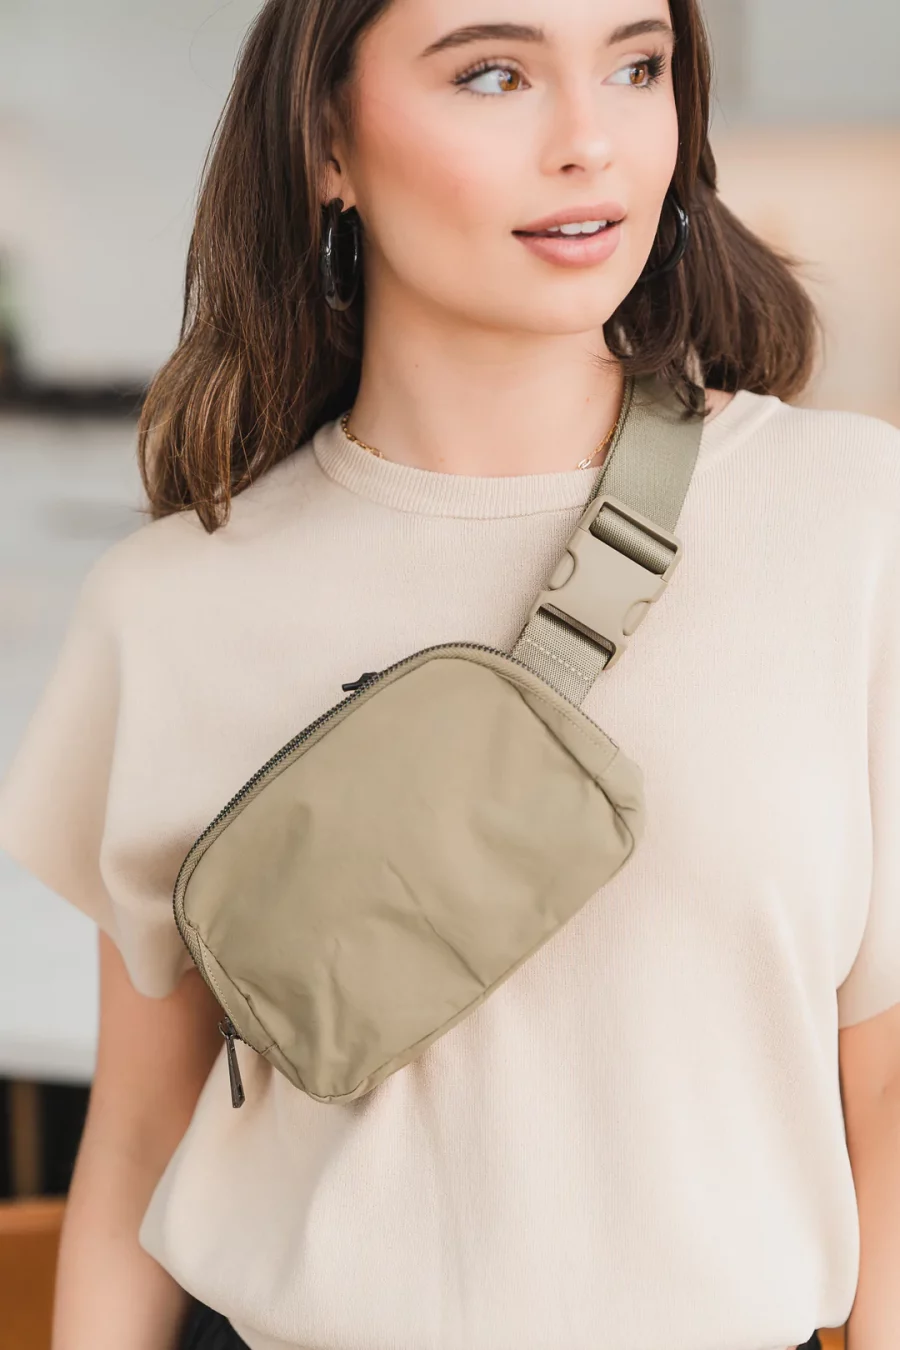 Woman with dark brown hair in a light pink shirt modeling beige fanny pack across her body